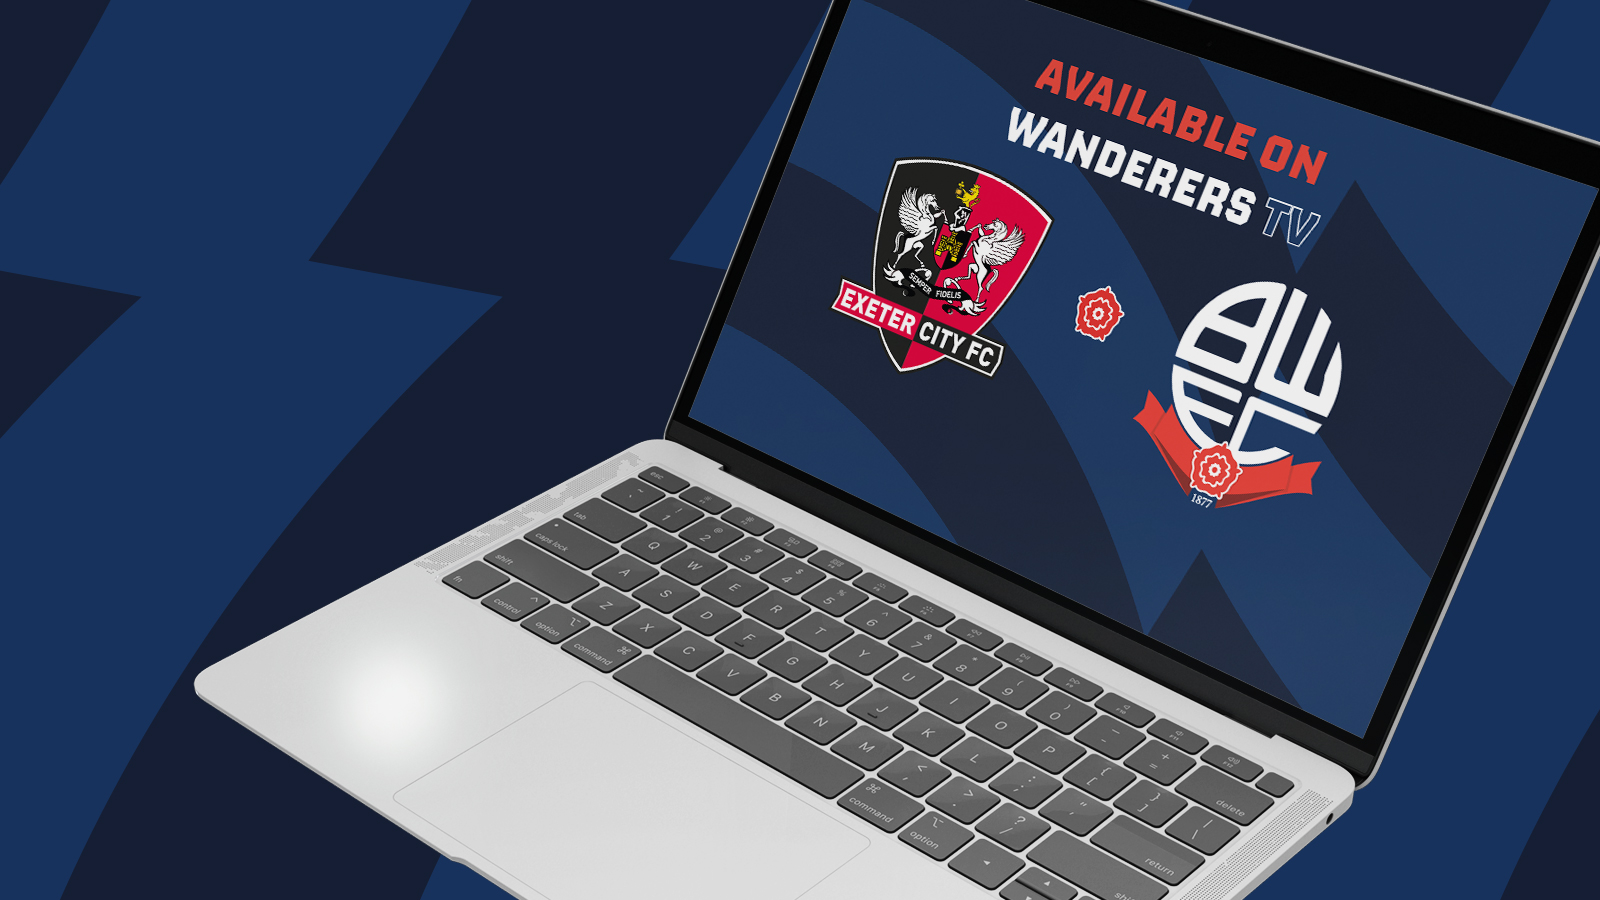 exeter city wanderers tv